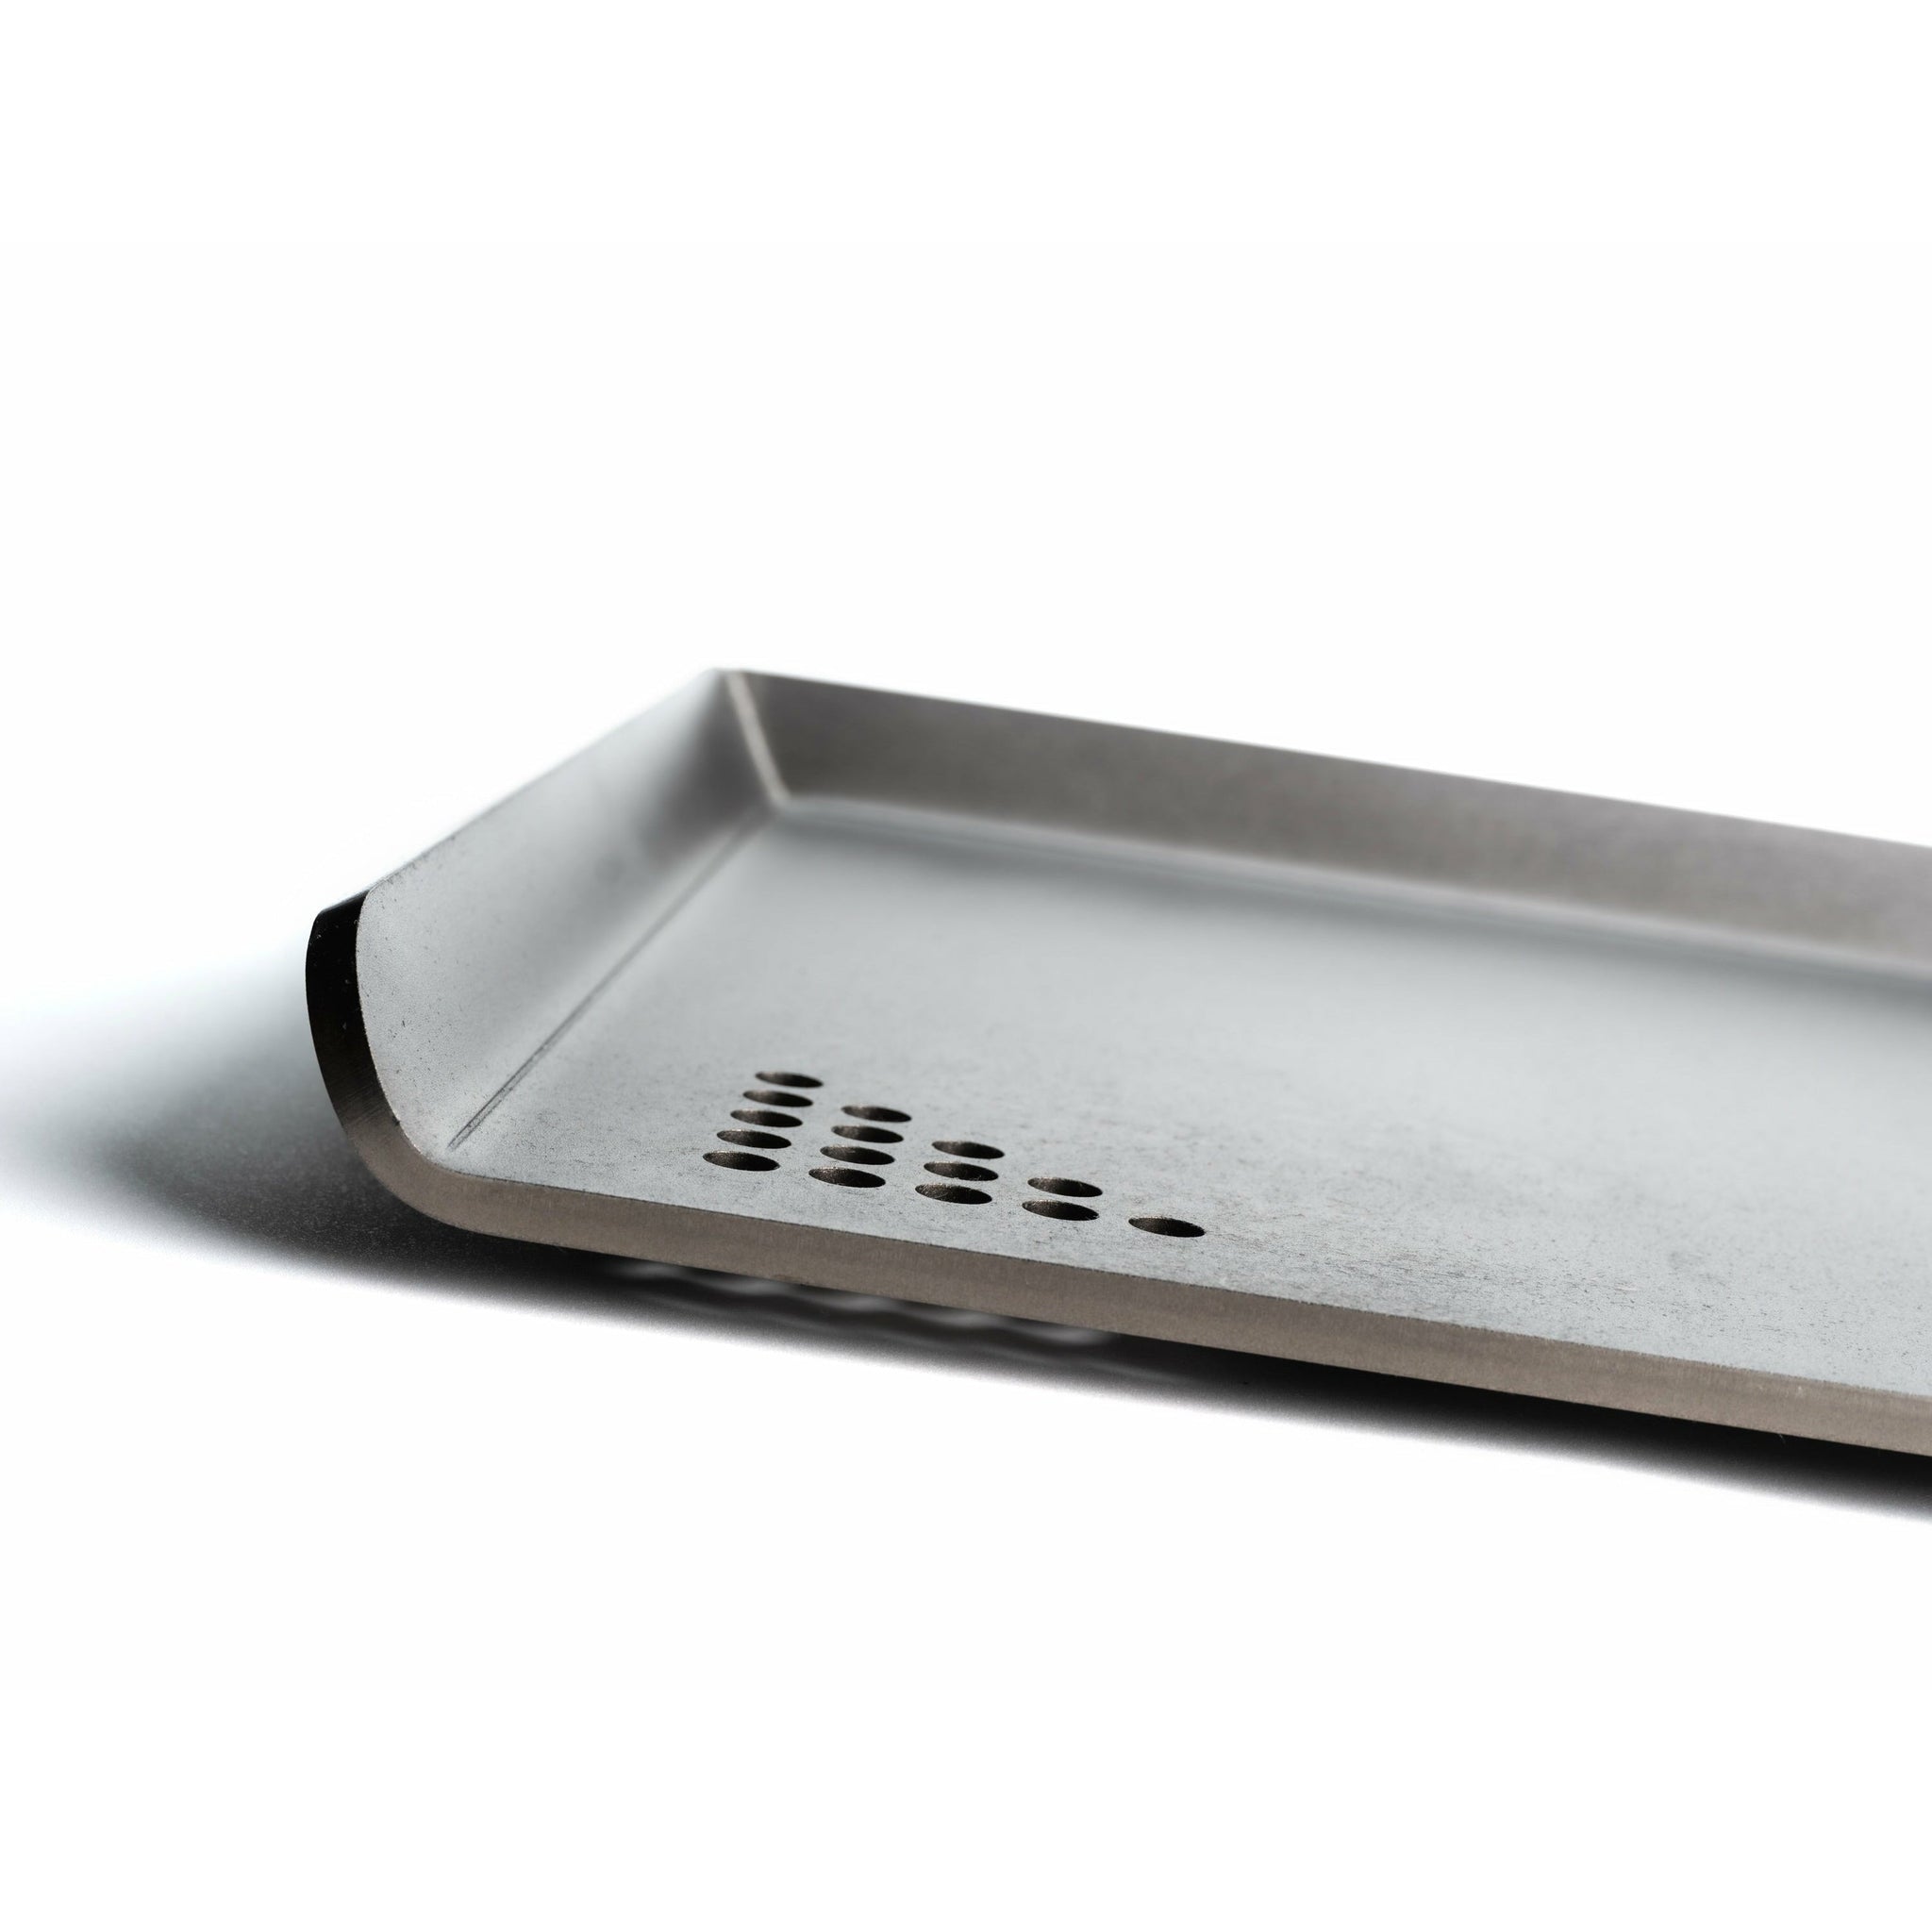 Stove Flat Top Griddle for GAS or Electric Coil Range by steelmade USA